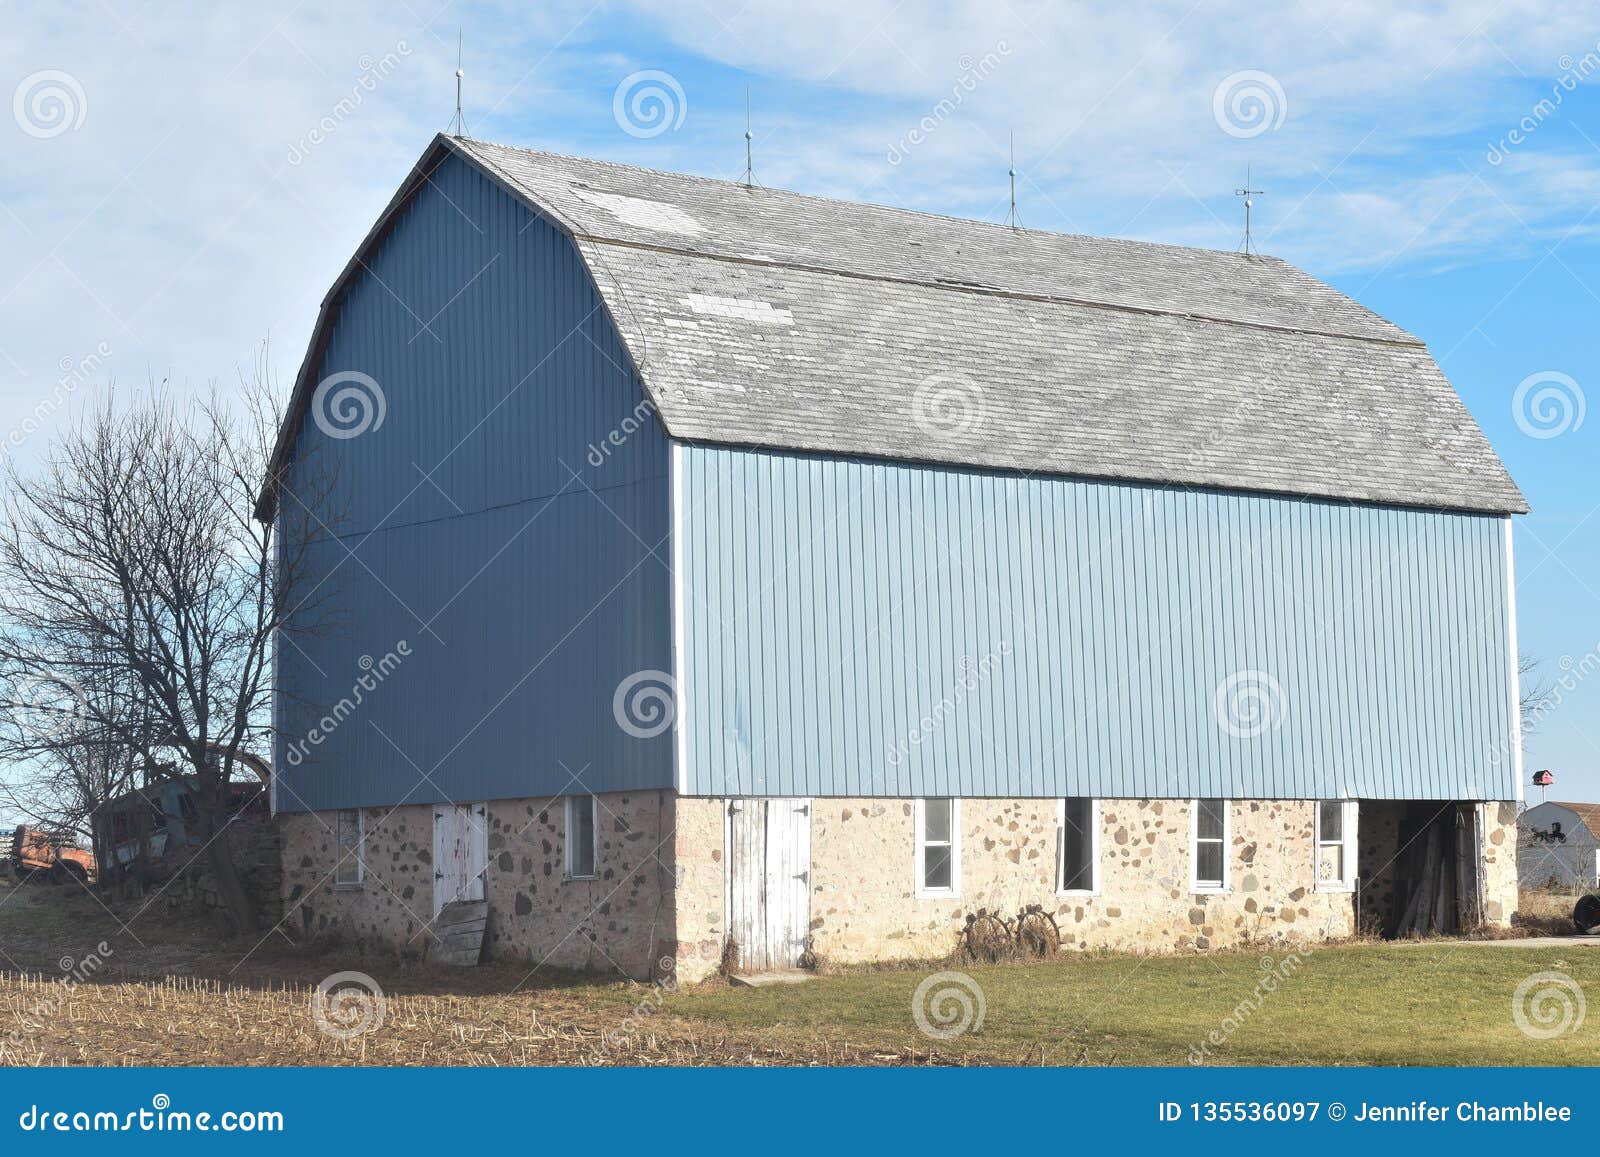 Old Light Blue Barn With A Field Stone Foundation On A Farm In Late Autumn On A Sunny Day Stock Image Image Of Farm